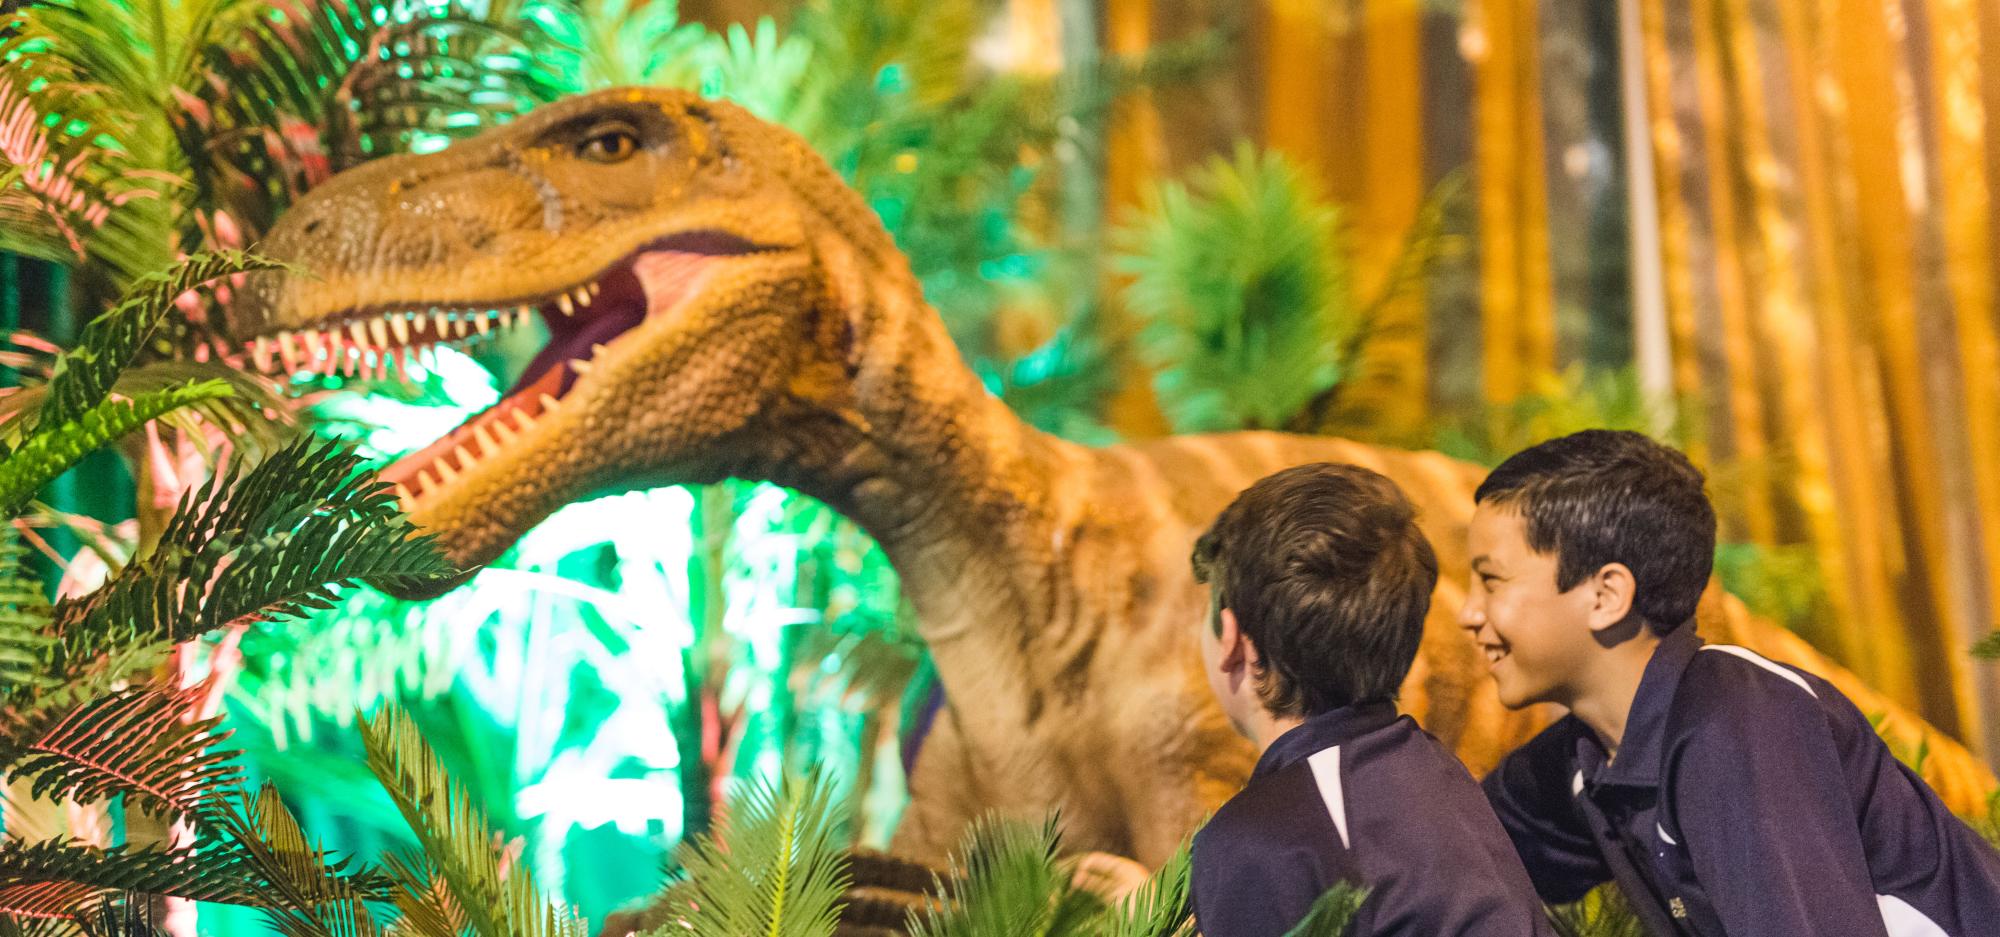 Two children look excitedly at a moving dinosaur puppet standing in a leafy garden